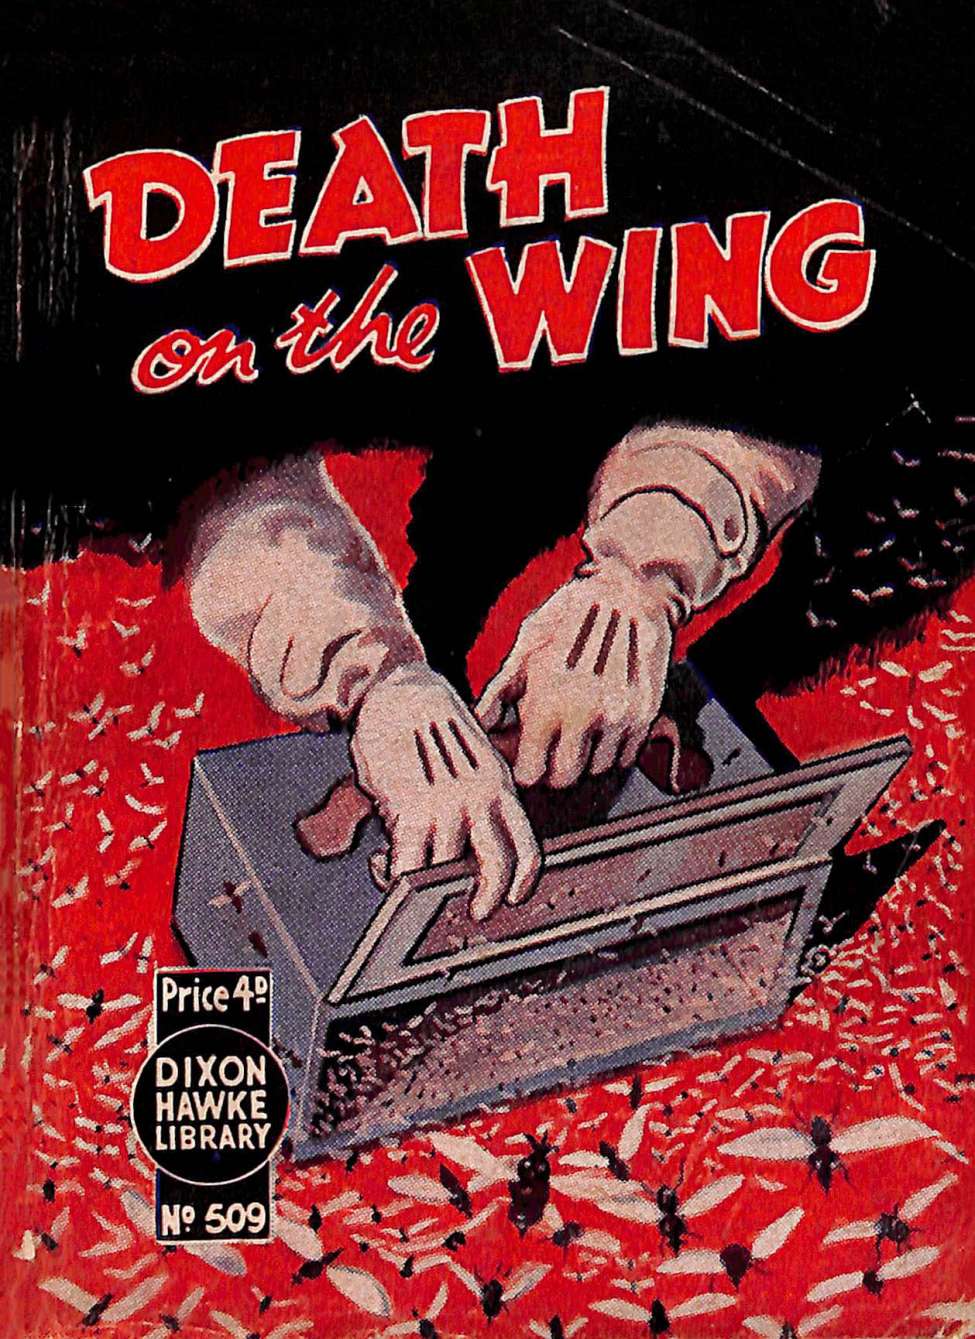 Comic Book Cover For Dixon Hawke Library 509 - Death on the Wing